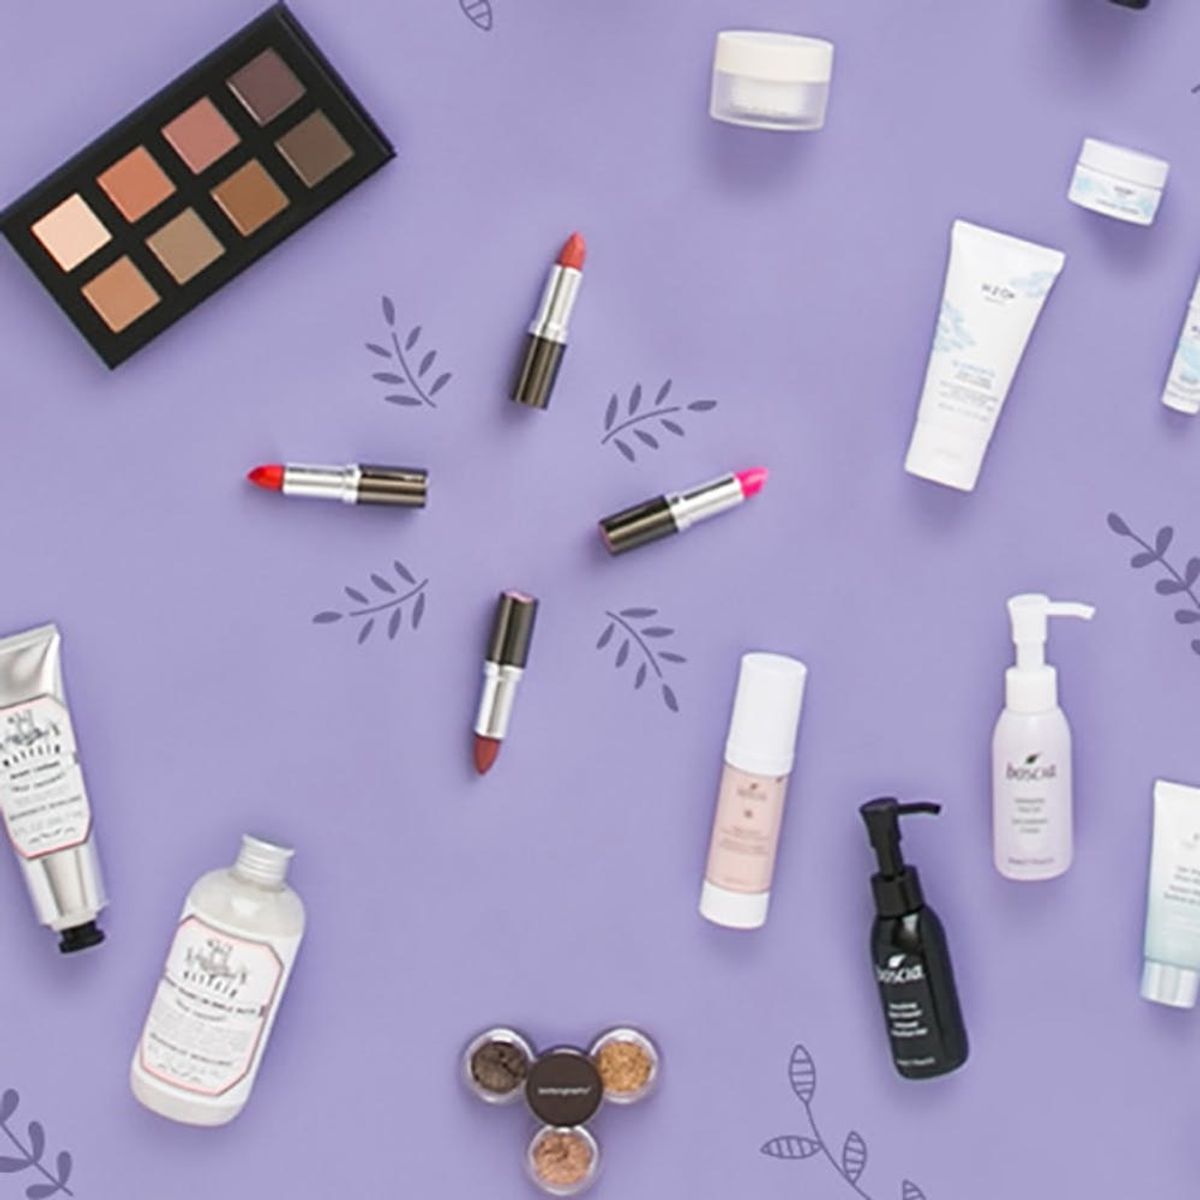 14 Under $50 Beauty Gifts You’ll Want Under the Tree